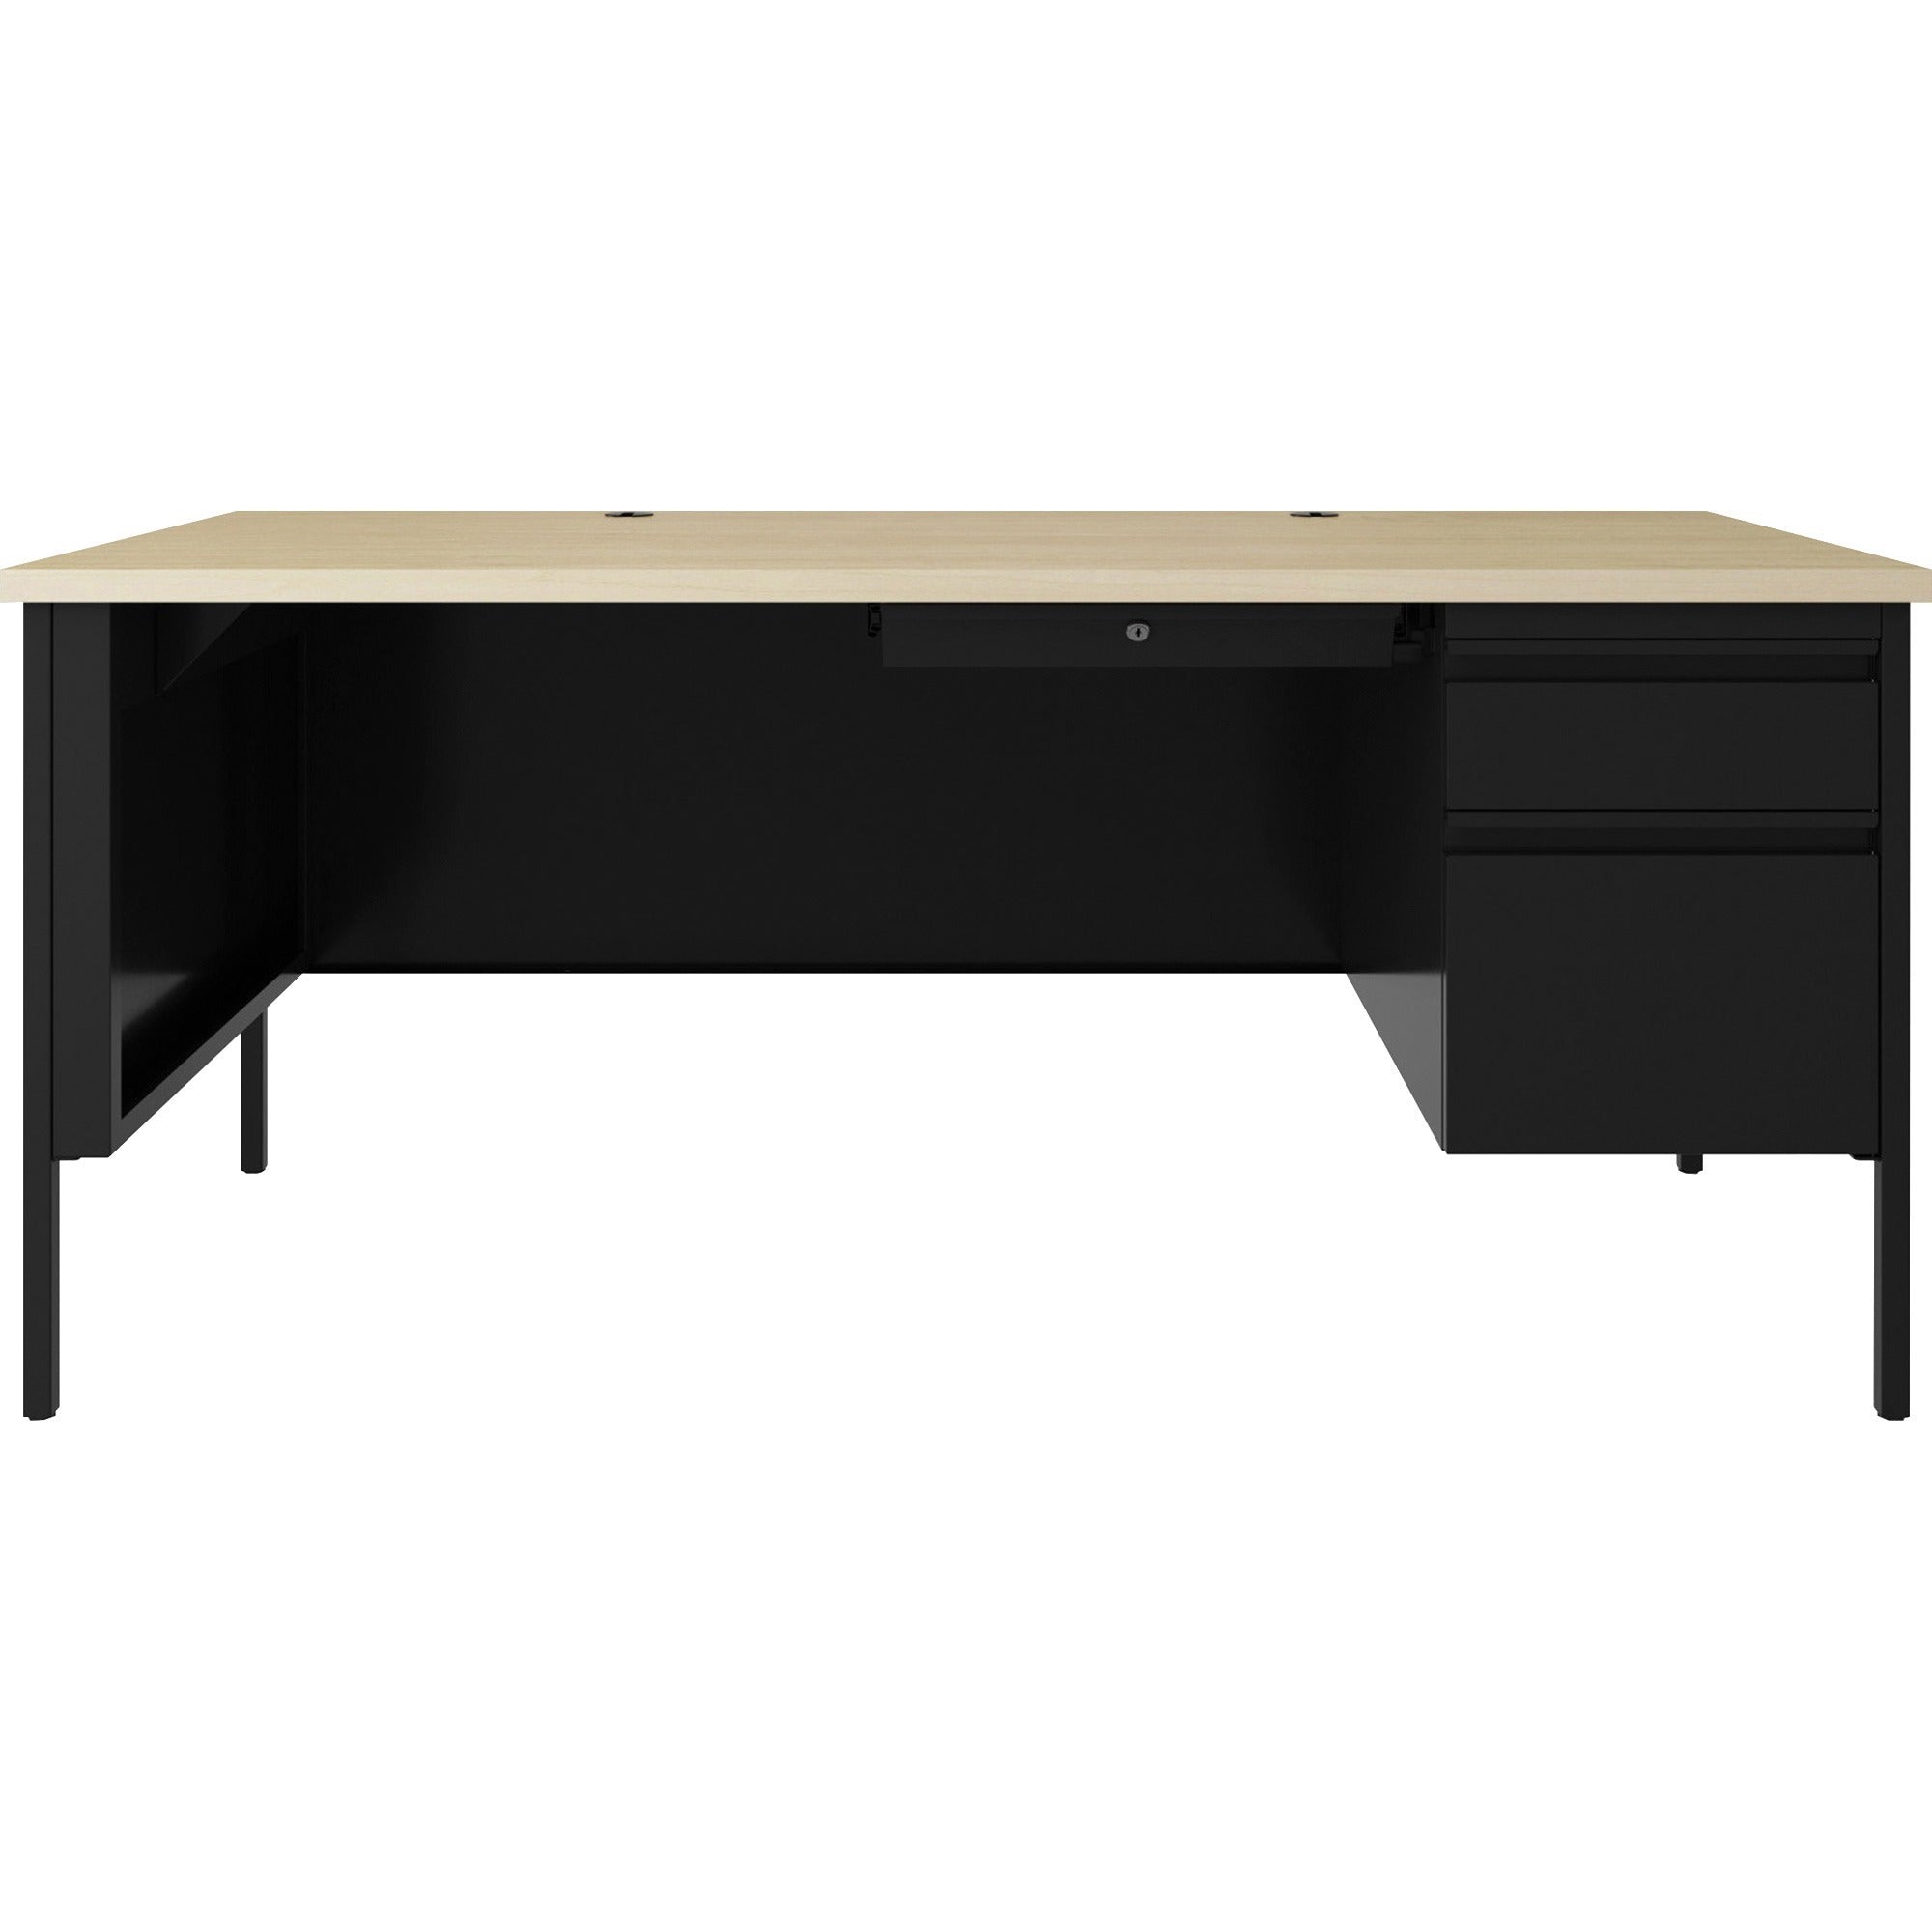 lorell-fortress-series-66-right-pedestal-desk-66-x-29530--08-modesty-panel-11-top-single-pedestal-on-right-side-square-edge-material-steel-finish-black_llr66906 - 2